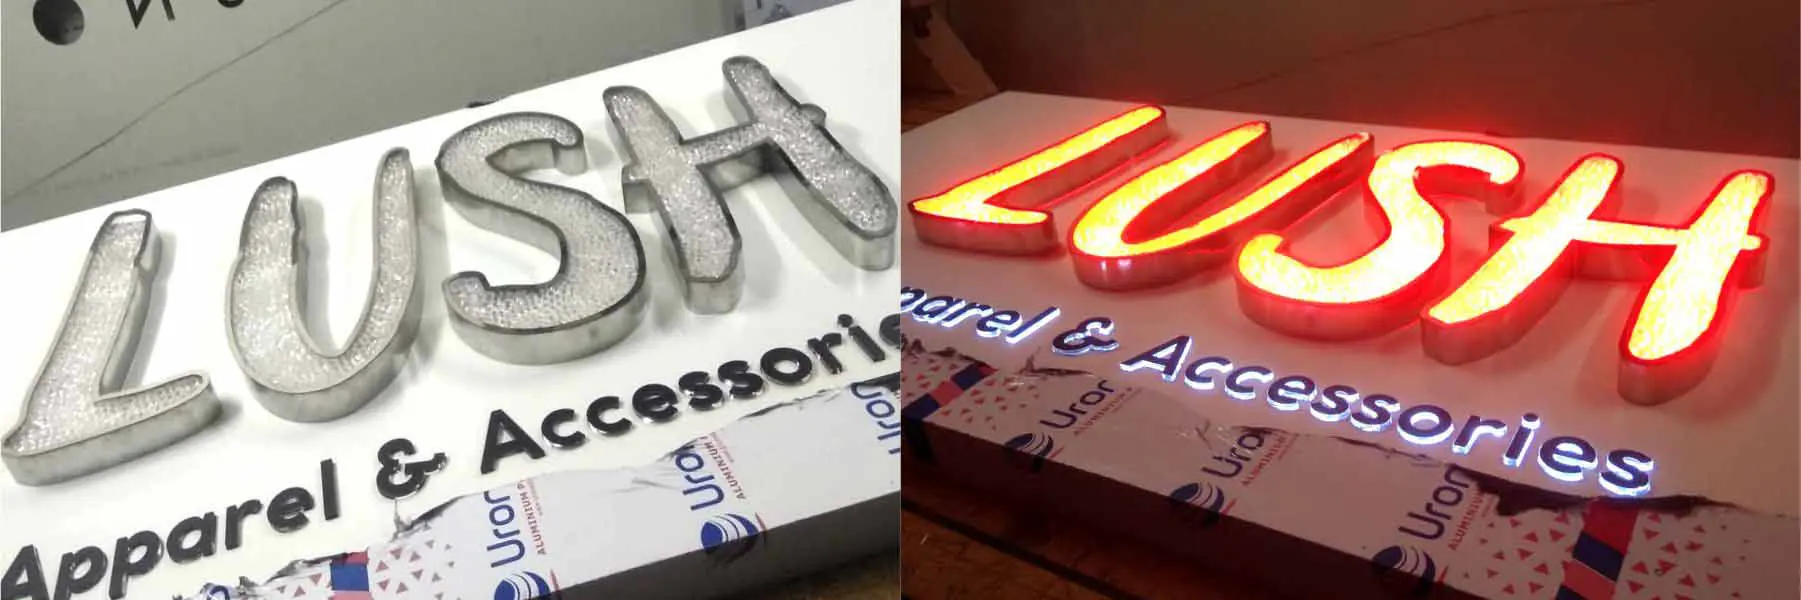 Channel letter glow sign board made of metal skirting and crystal LEDs on top. Day and night view showing the board with lights switched on and off